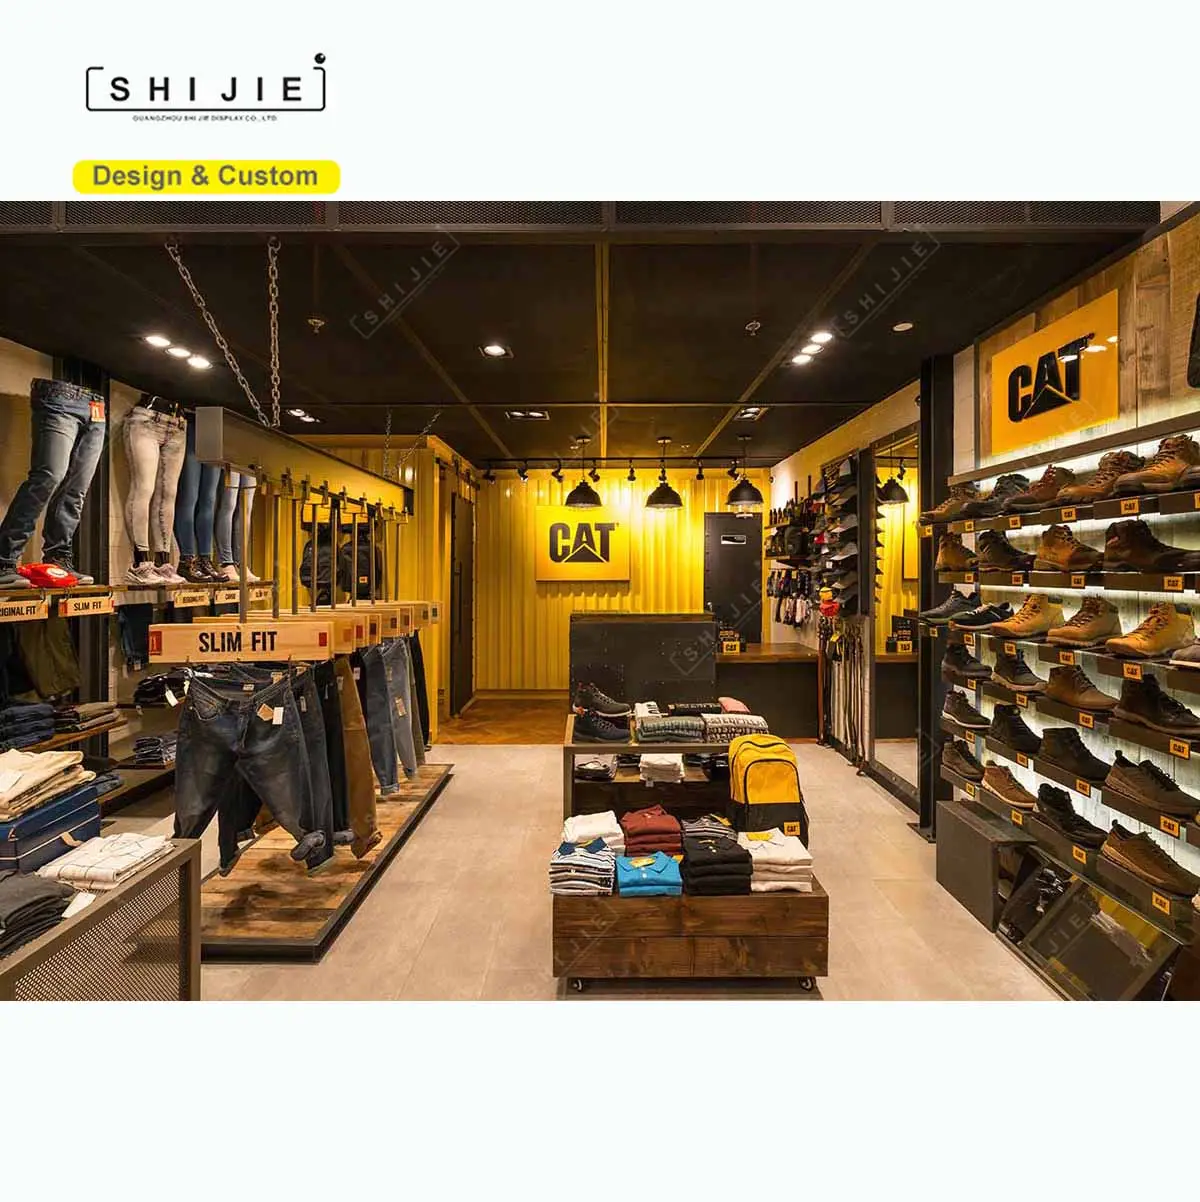 Men Jeans and Shoes Retailing Stores Interior Display Furniture Design Wooden Sportswear Shopfittings Decoration For Man Clothes